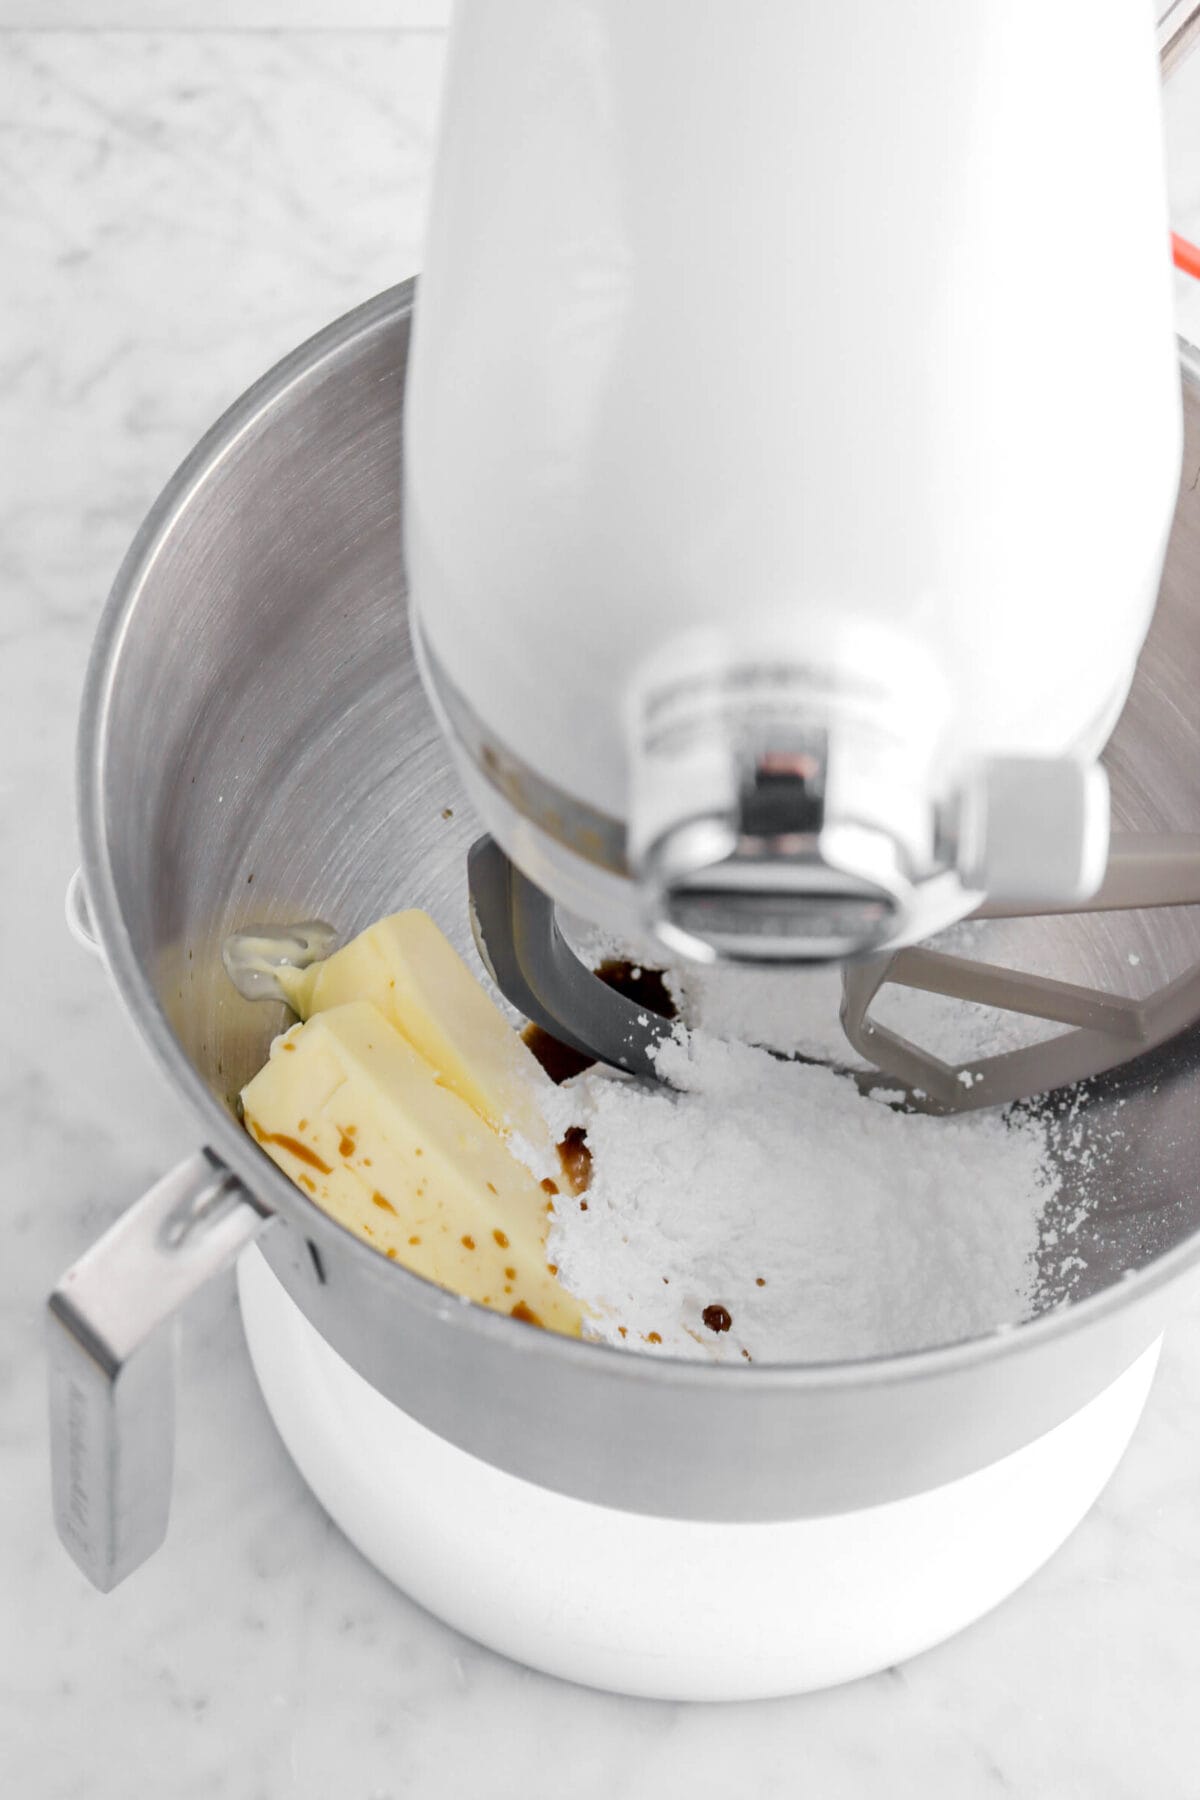 butter, powdered sugar, and vanilla in stand mixer.